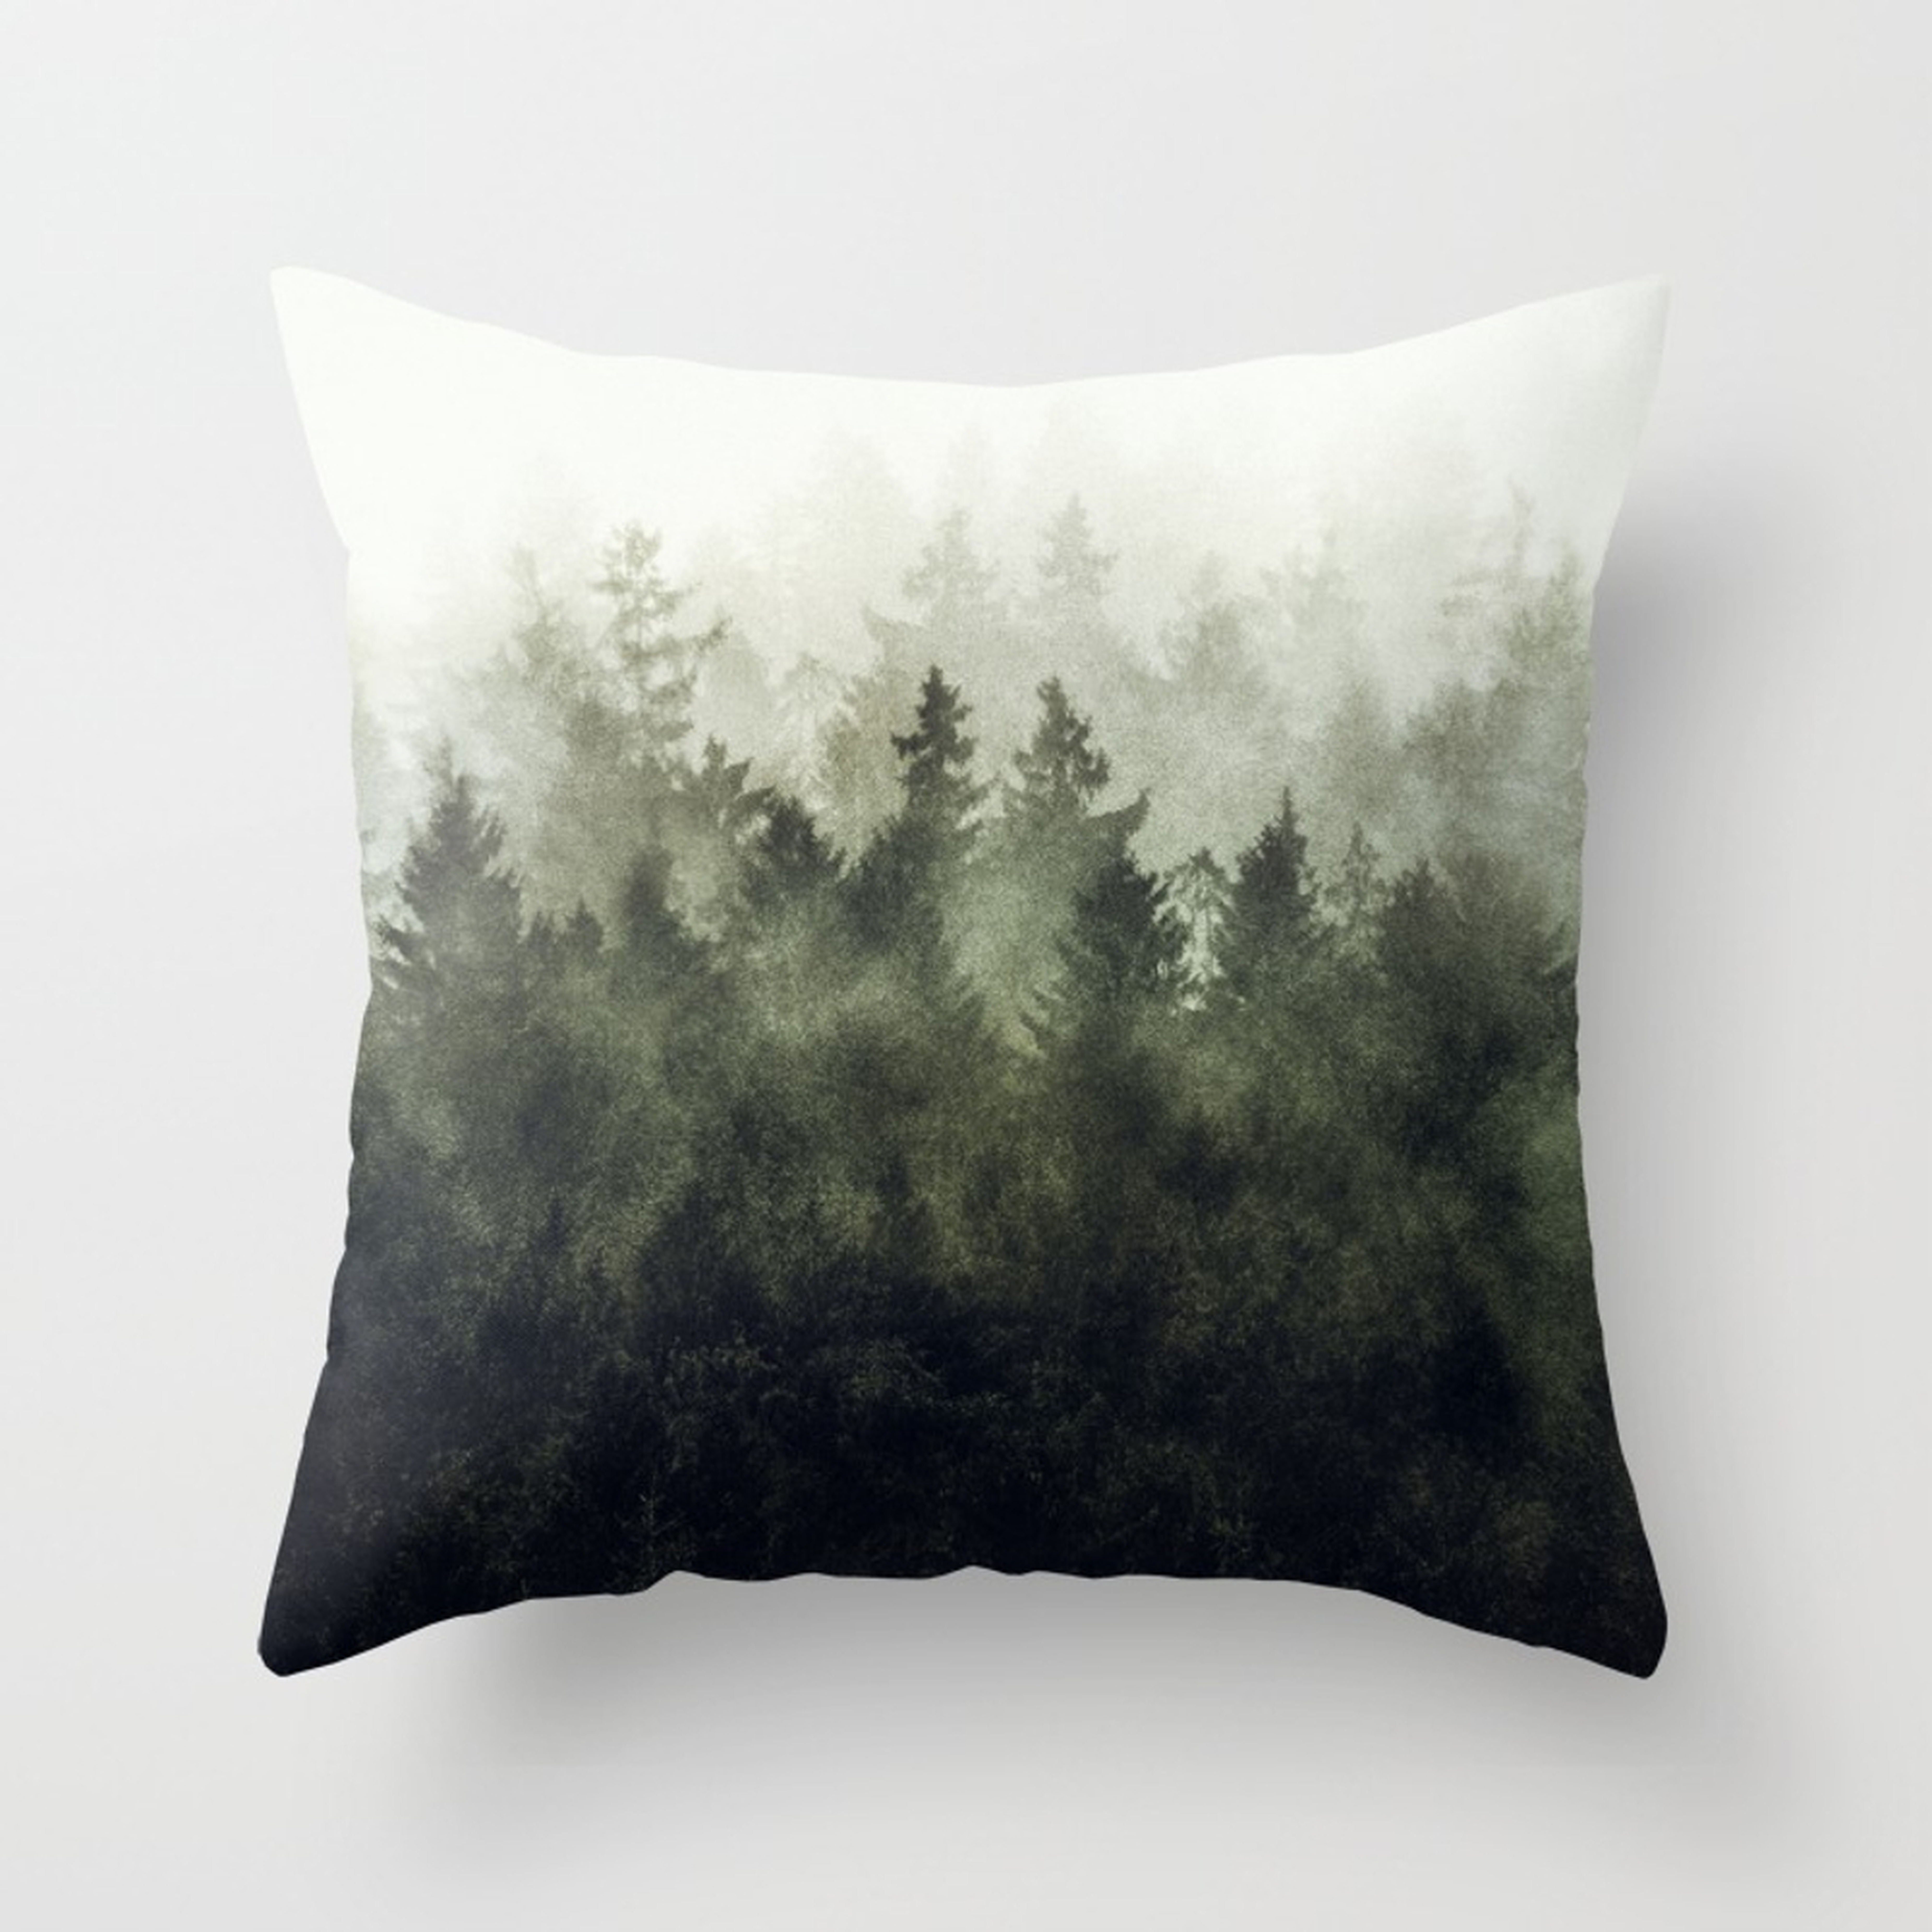 The Heart Of My Heart // Green Mountain Edit Throw Pillow - Indoor Cover (18" x 18") with pillow insert by Tekay - Society6